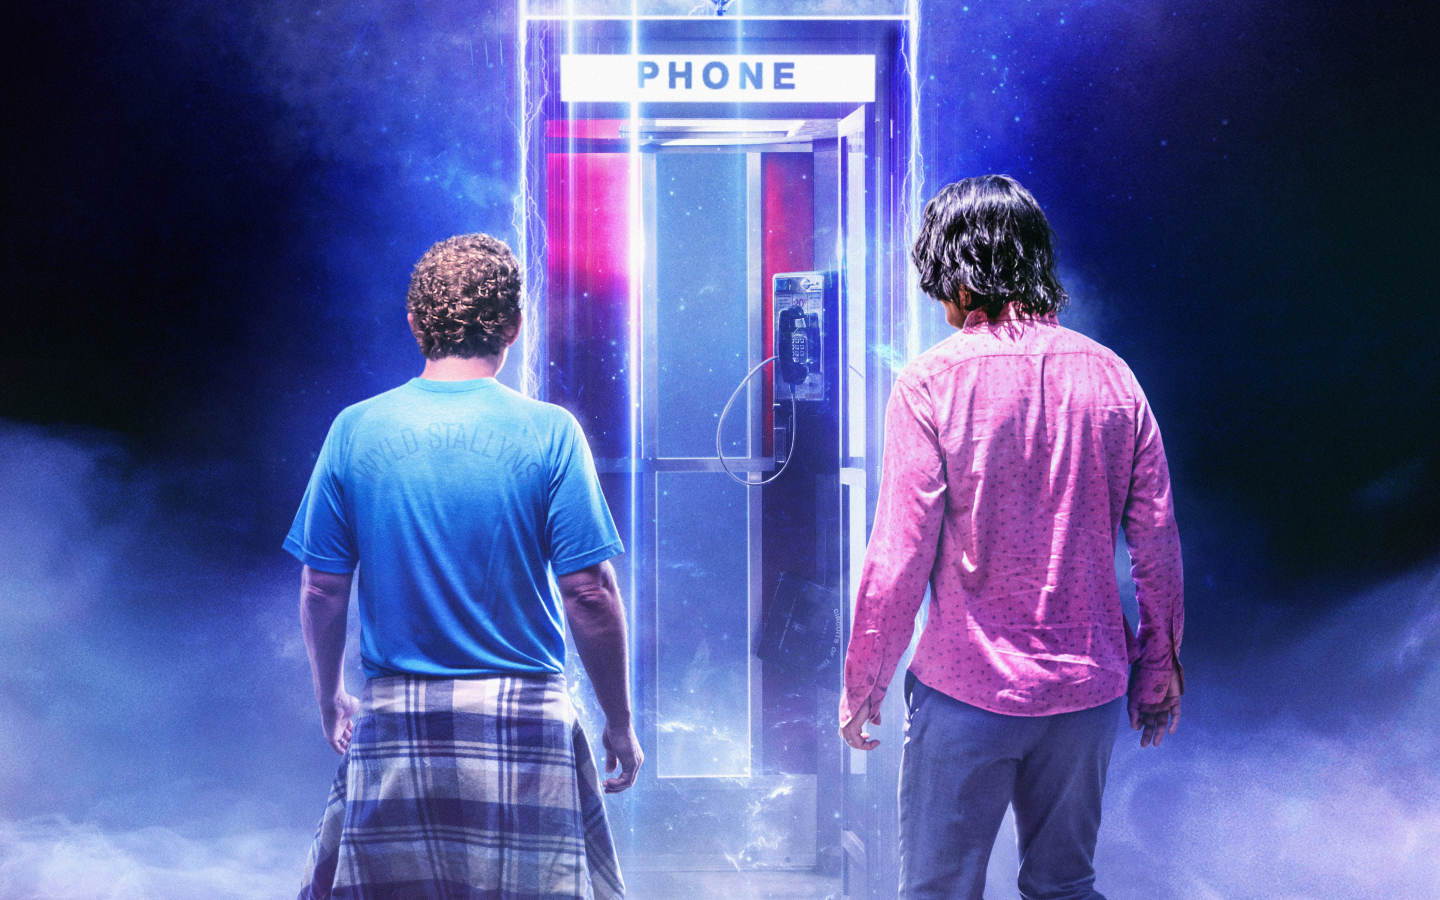 Bill & Ted 2020 movie poster